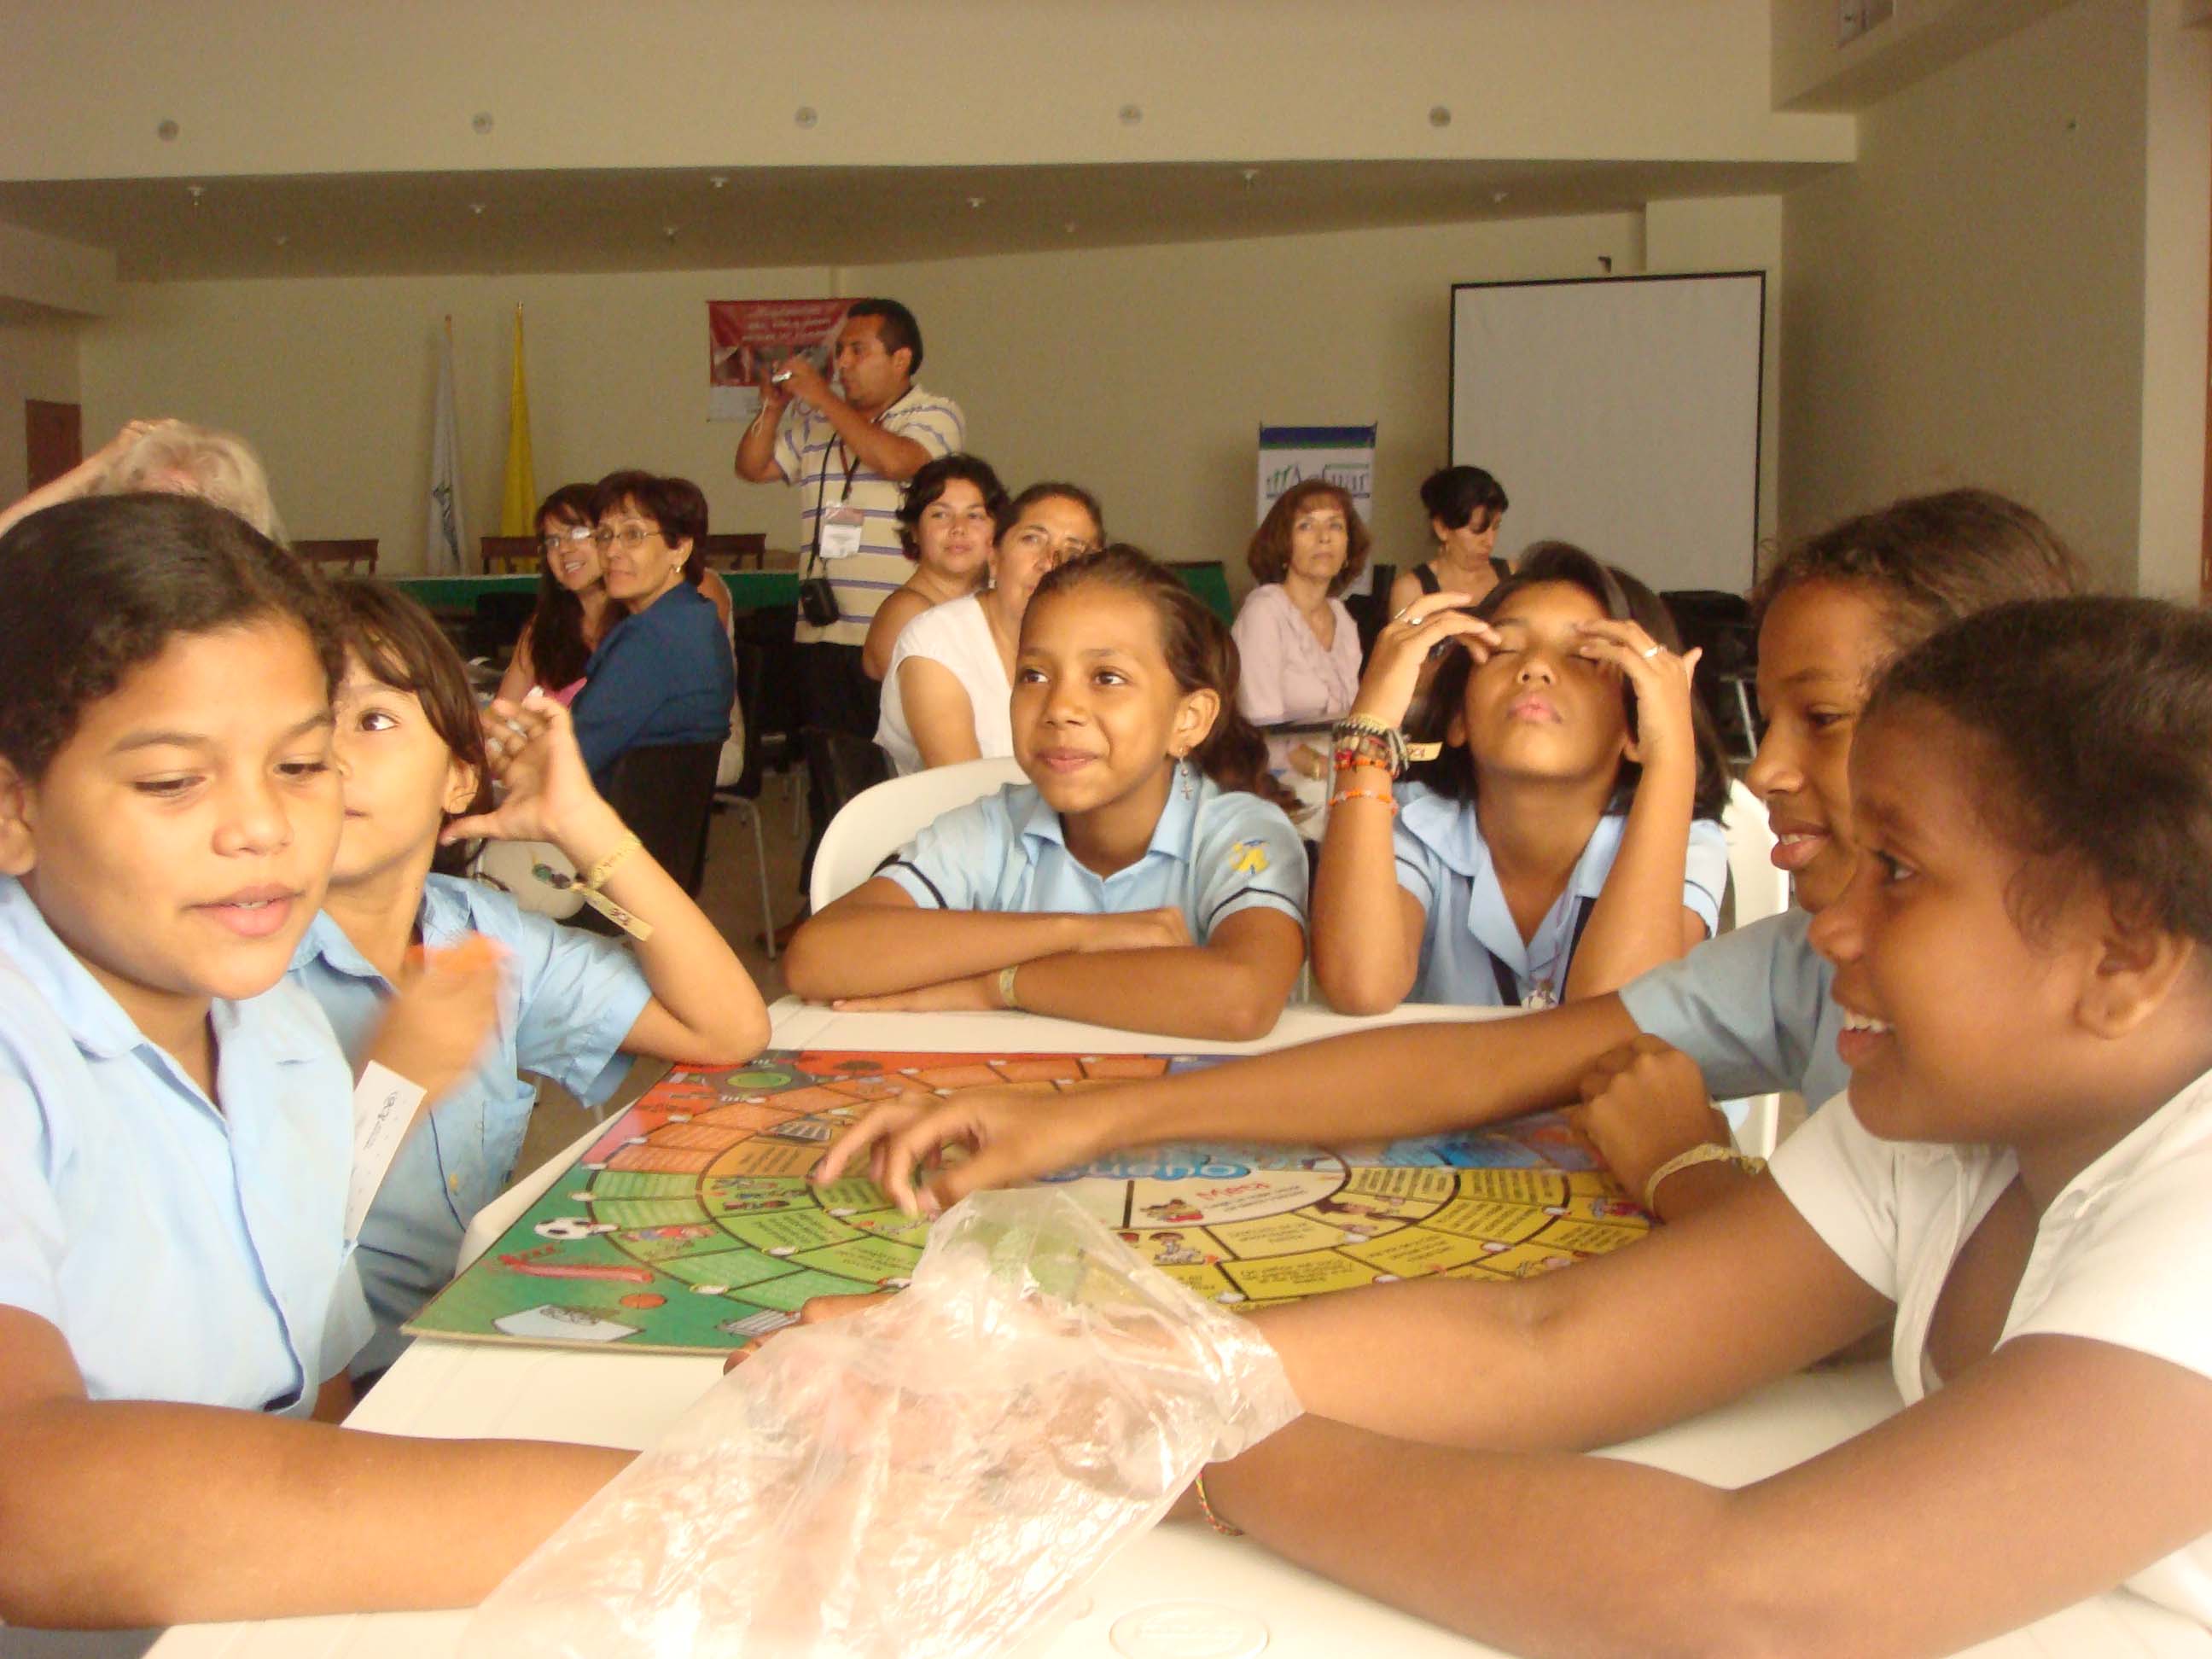  - at-cartagena-corpolatins-headquarters-kids-learn-their-rights-through-play-copia